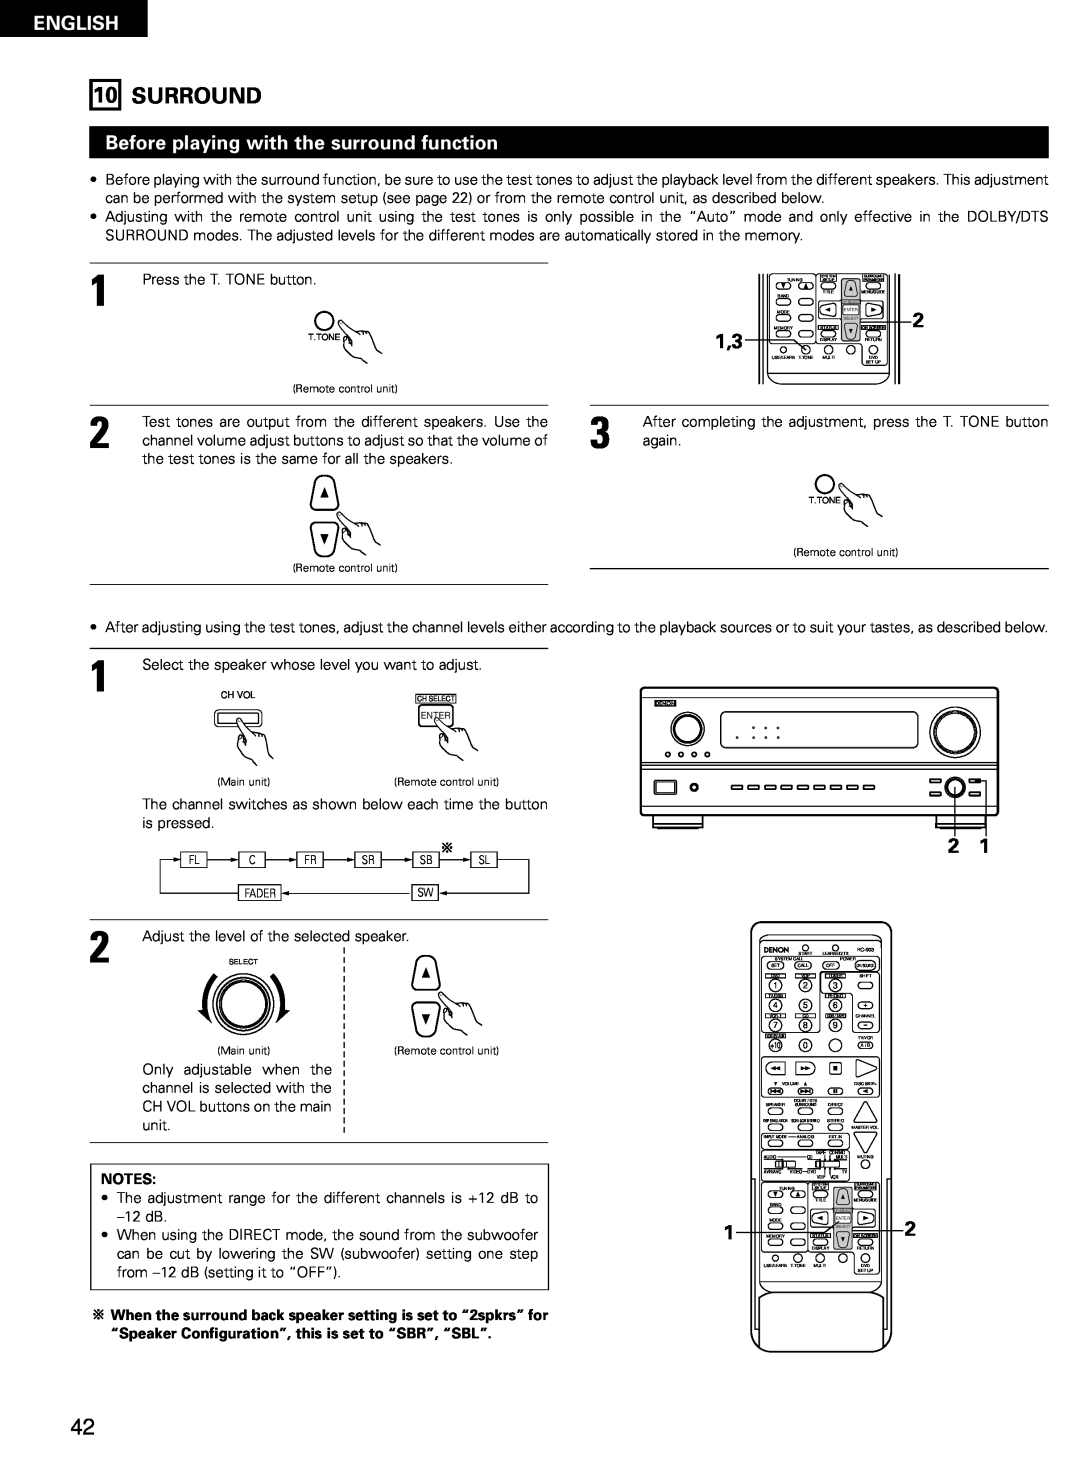 Denon AVR-2802/982 operating instructions Surround, English, Before playing with the surround function 